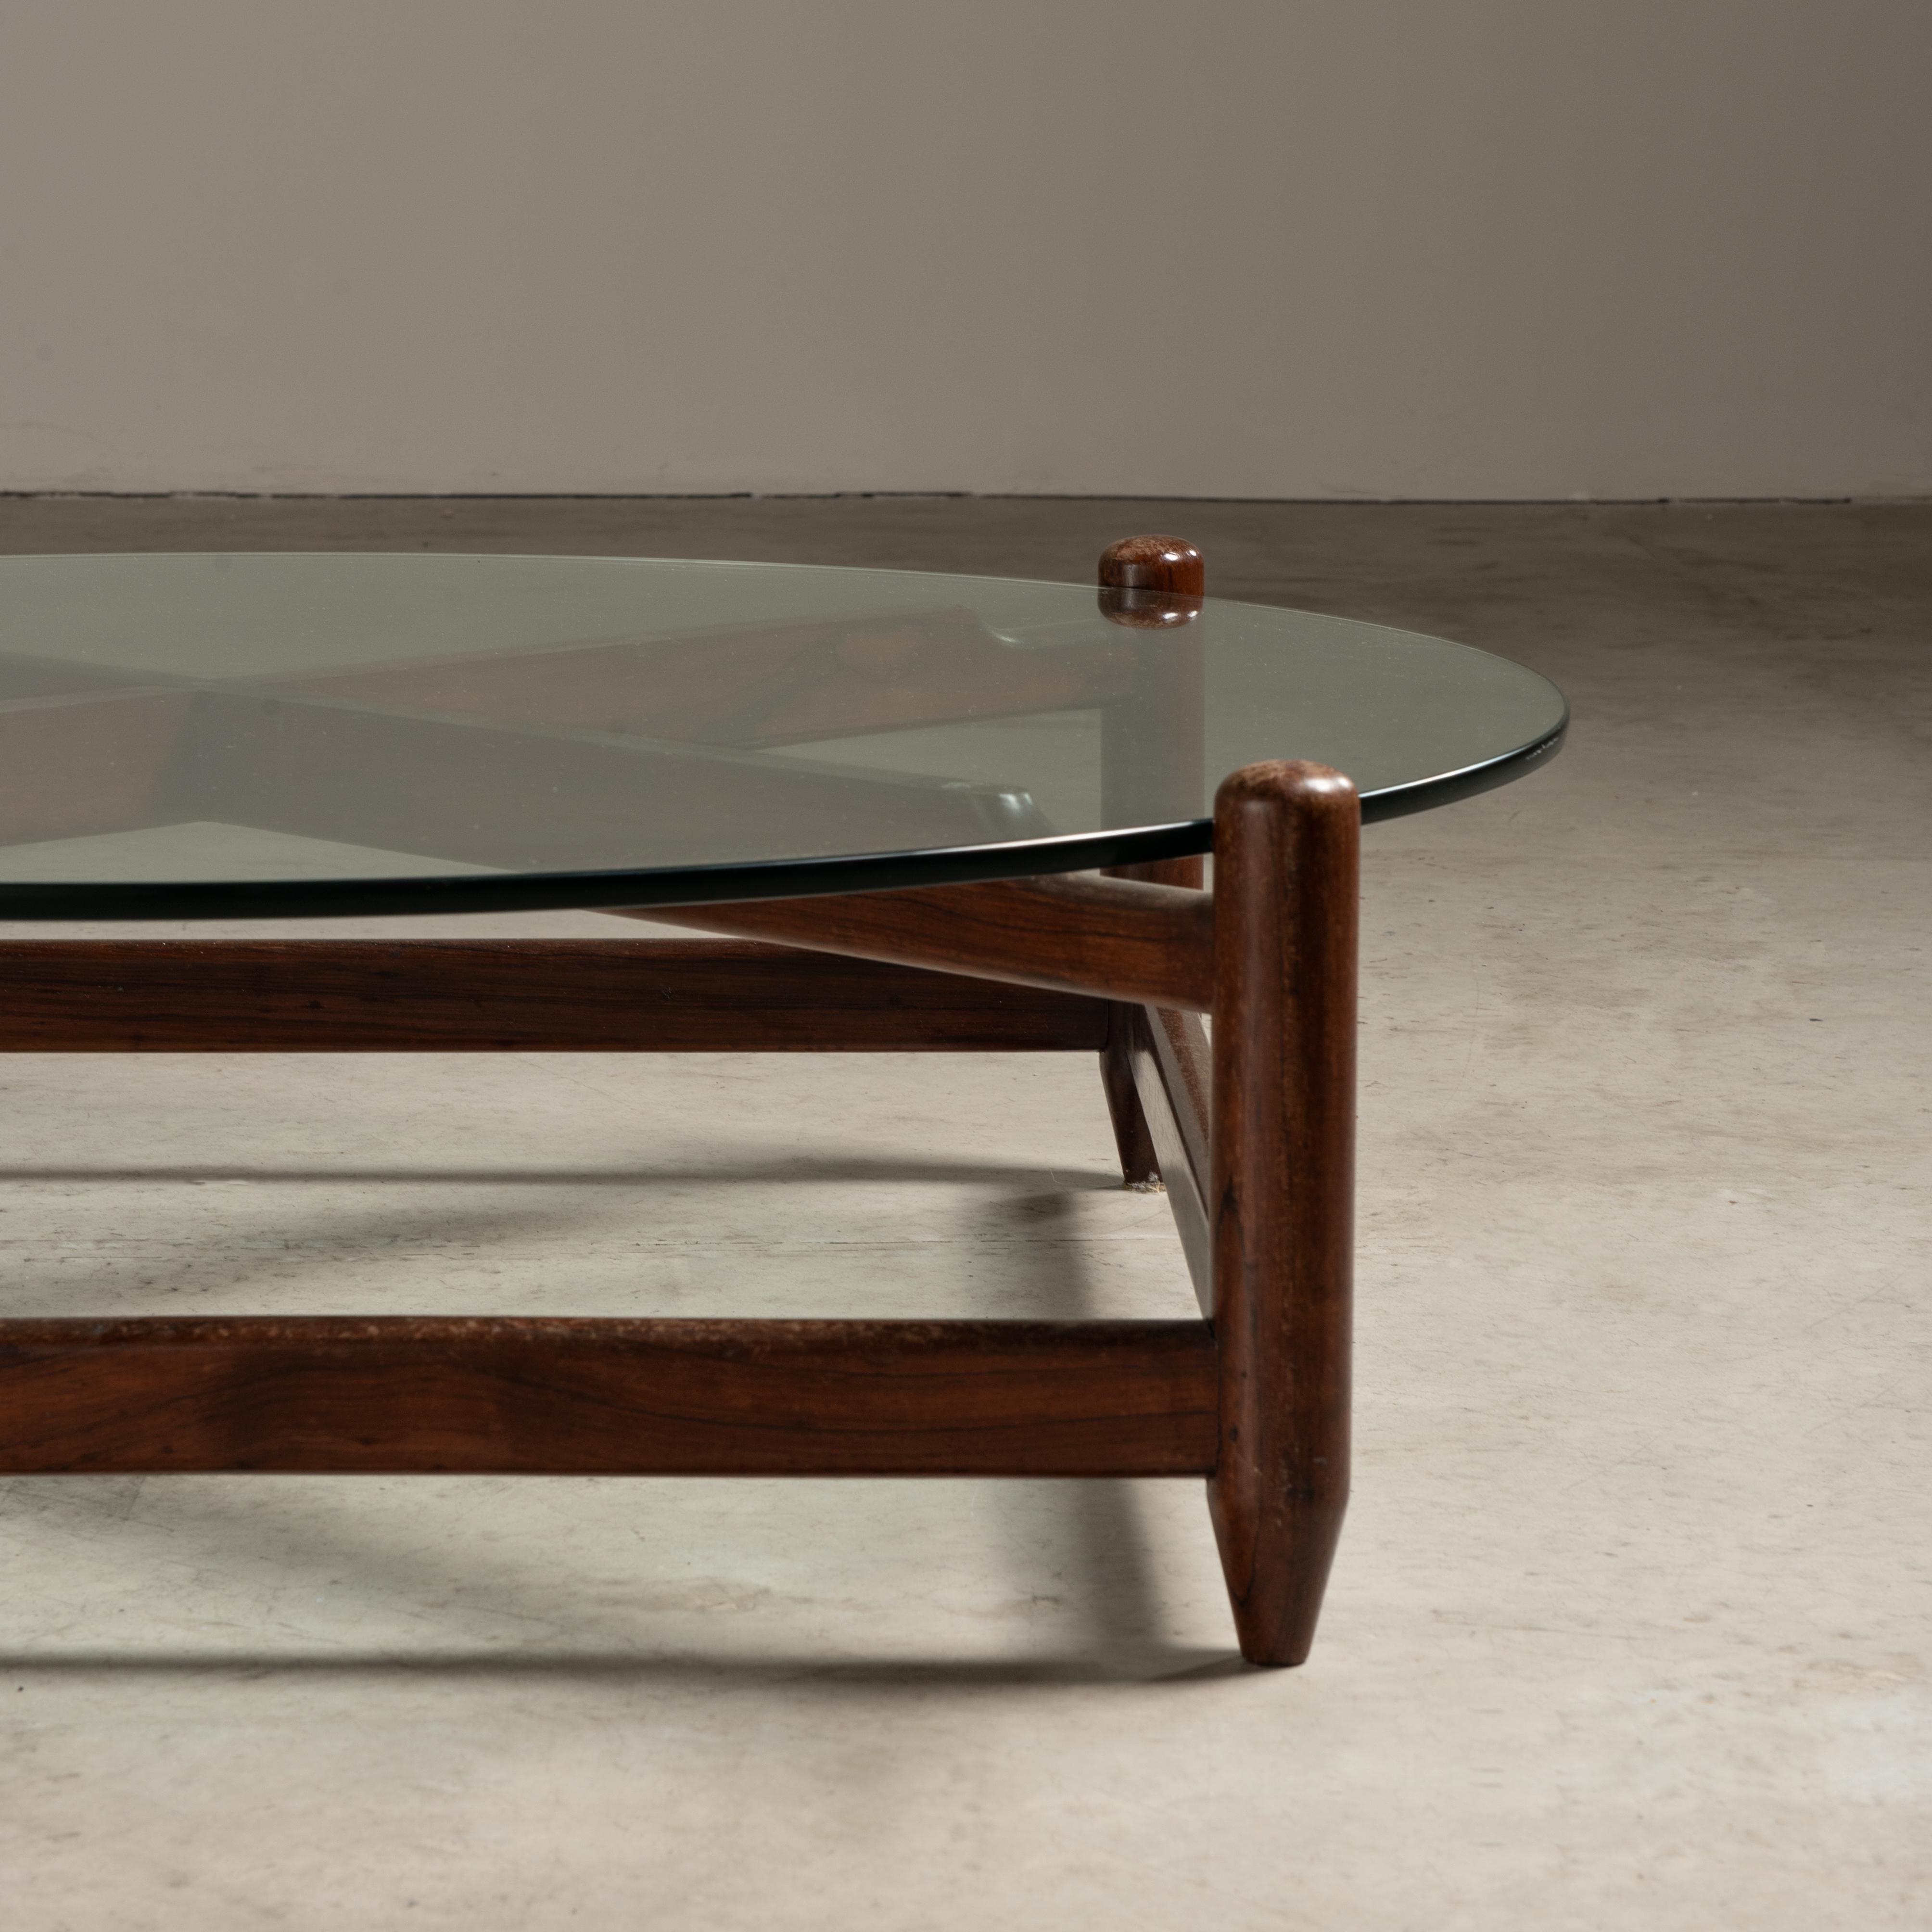 Rounded Coffee Table in Solid Hardwood and Glass, Brazilian Mid-Century Modern For Sale 1